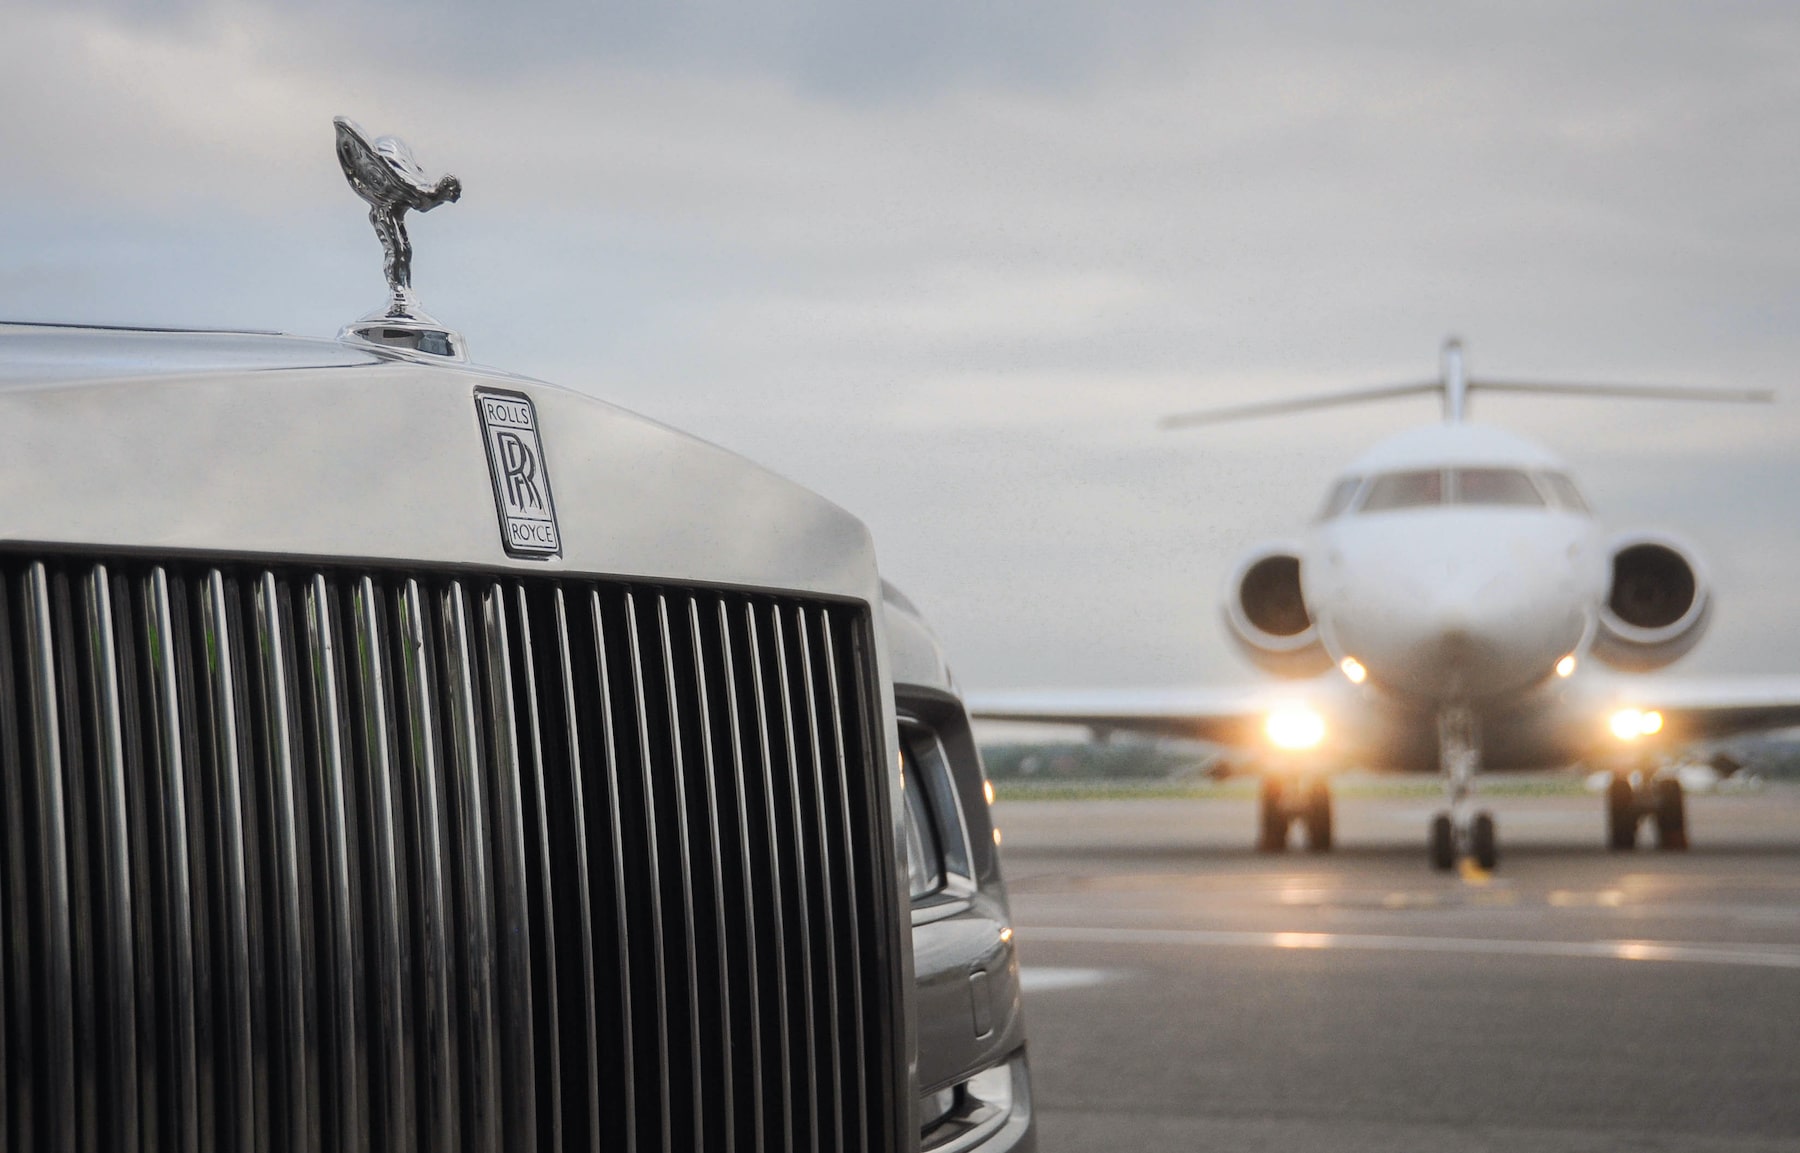 Luxury is a Rolls Royce and private jet